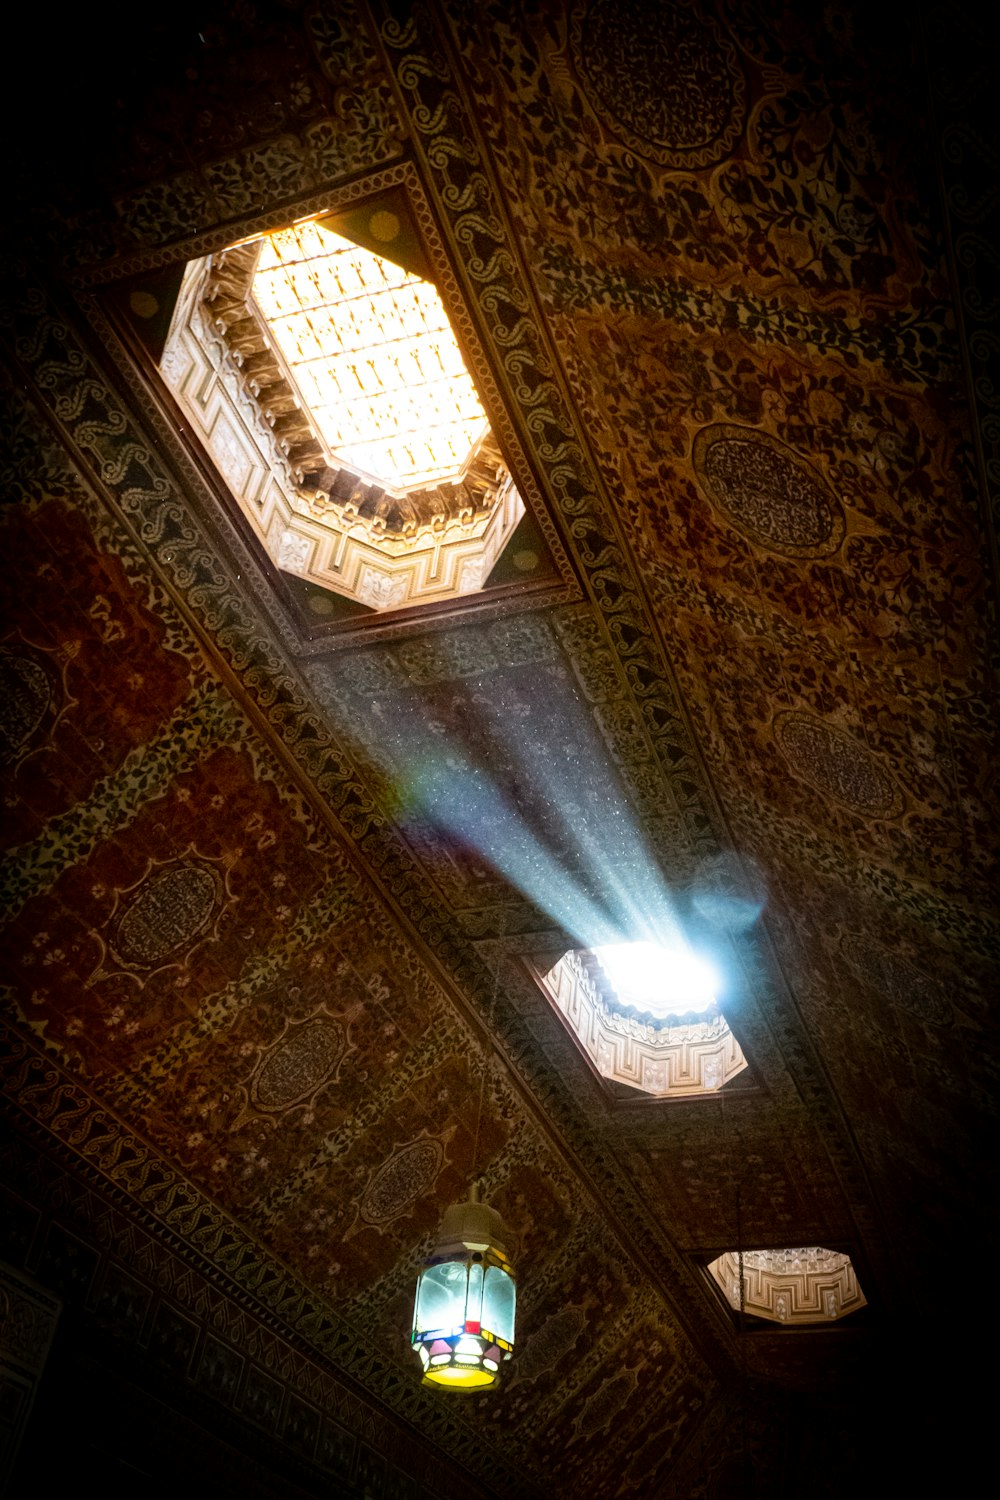 a light shines through the ceiling of a building